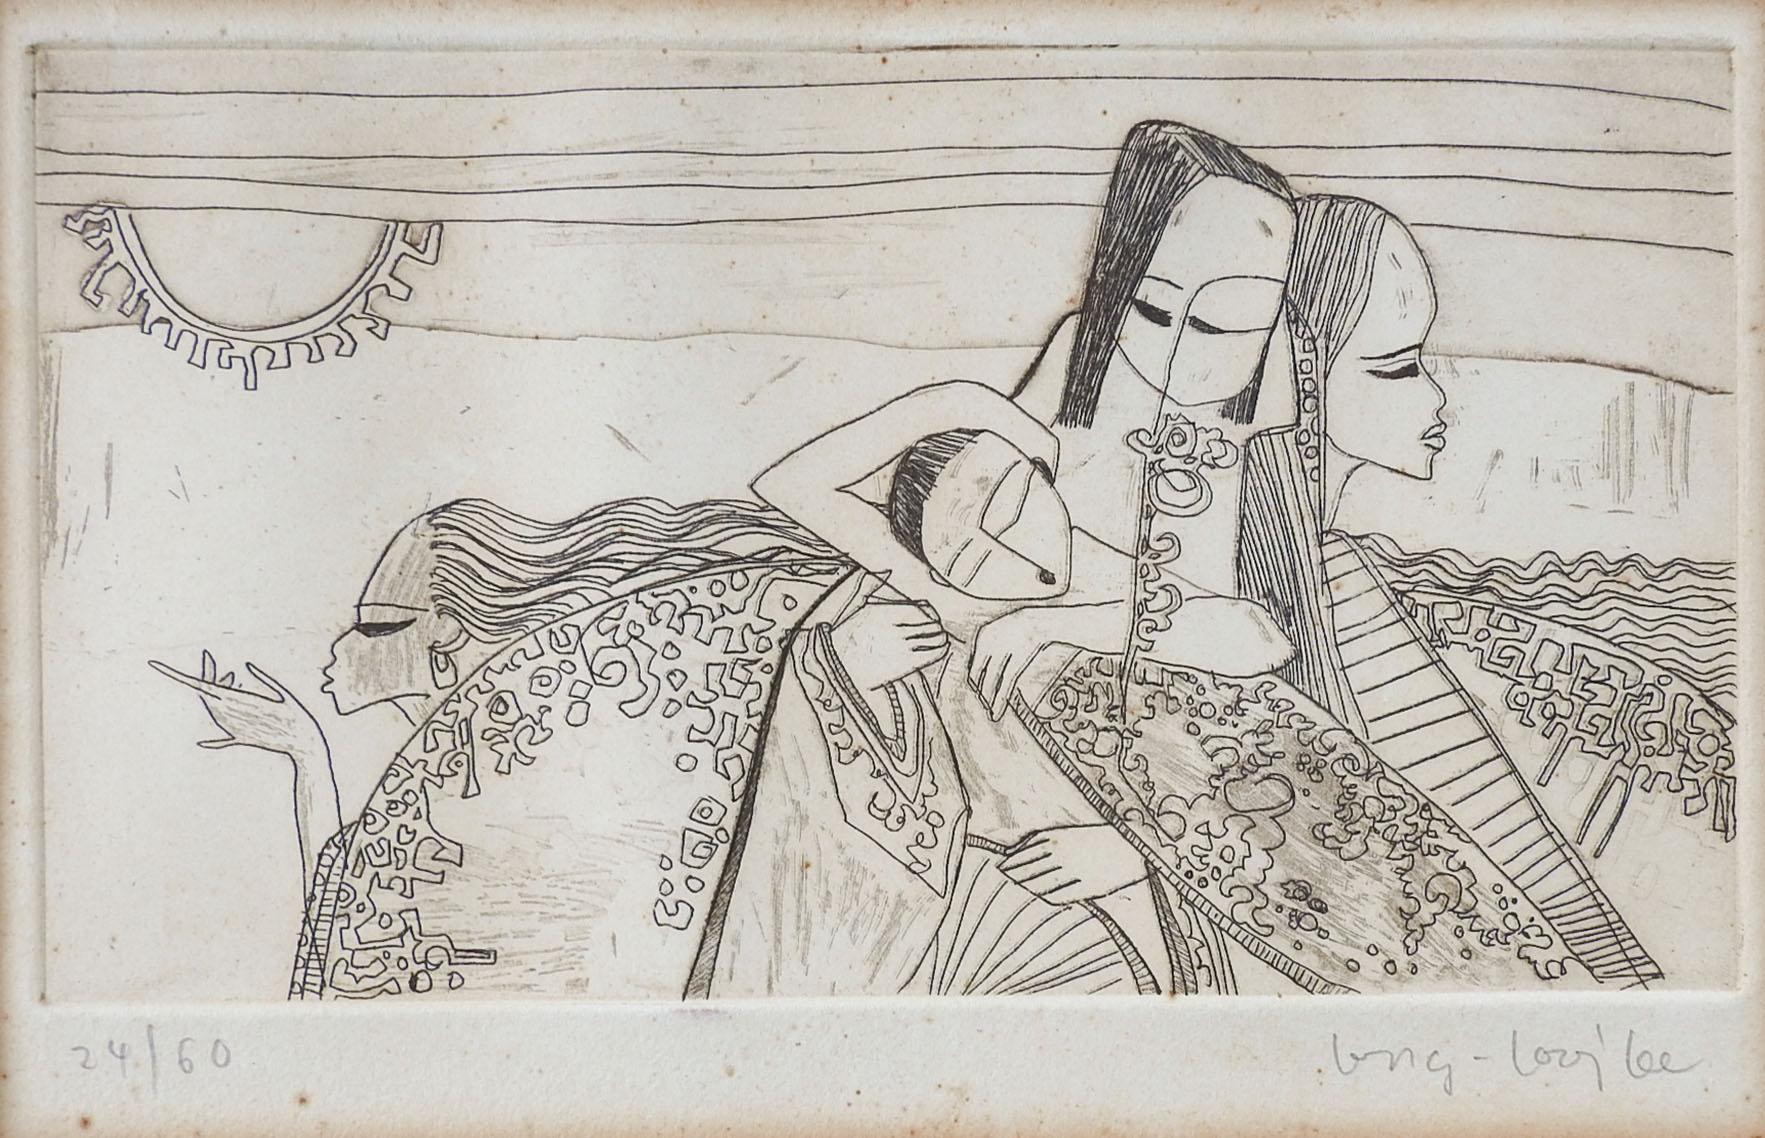 Etching on paper by Lee Long Looi (b. 1942) New York/Malaysia. Group of women in patterned robes. Signed and numbered 24/60 in pencil along bottom margin. Unframed. Displayed in original mat, opening size 10.5